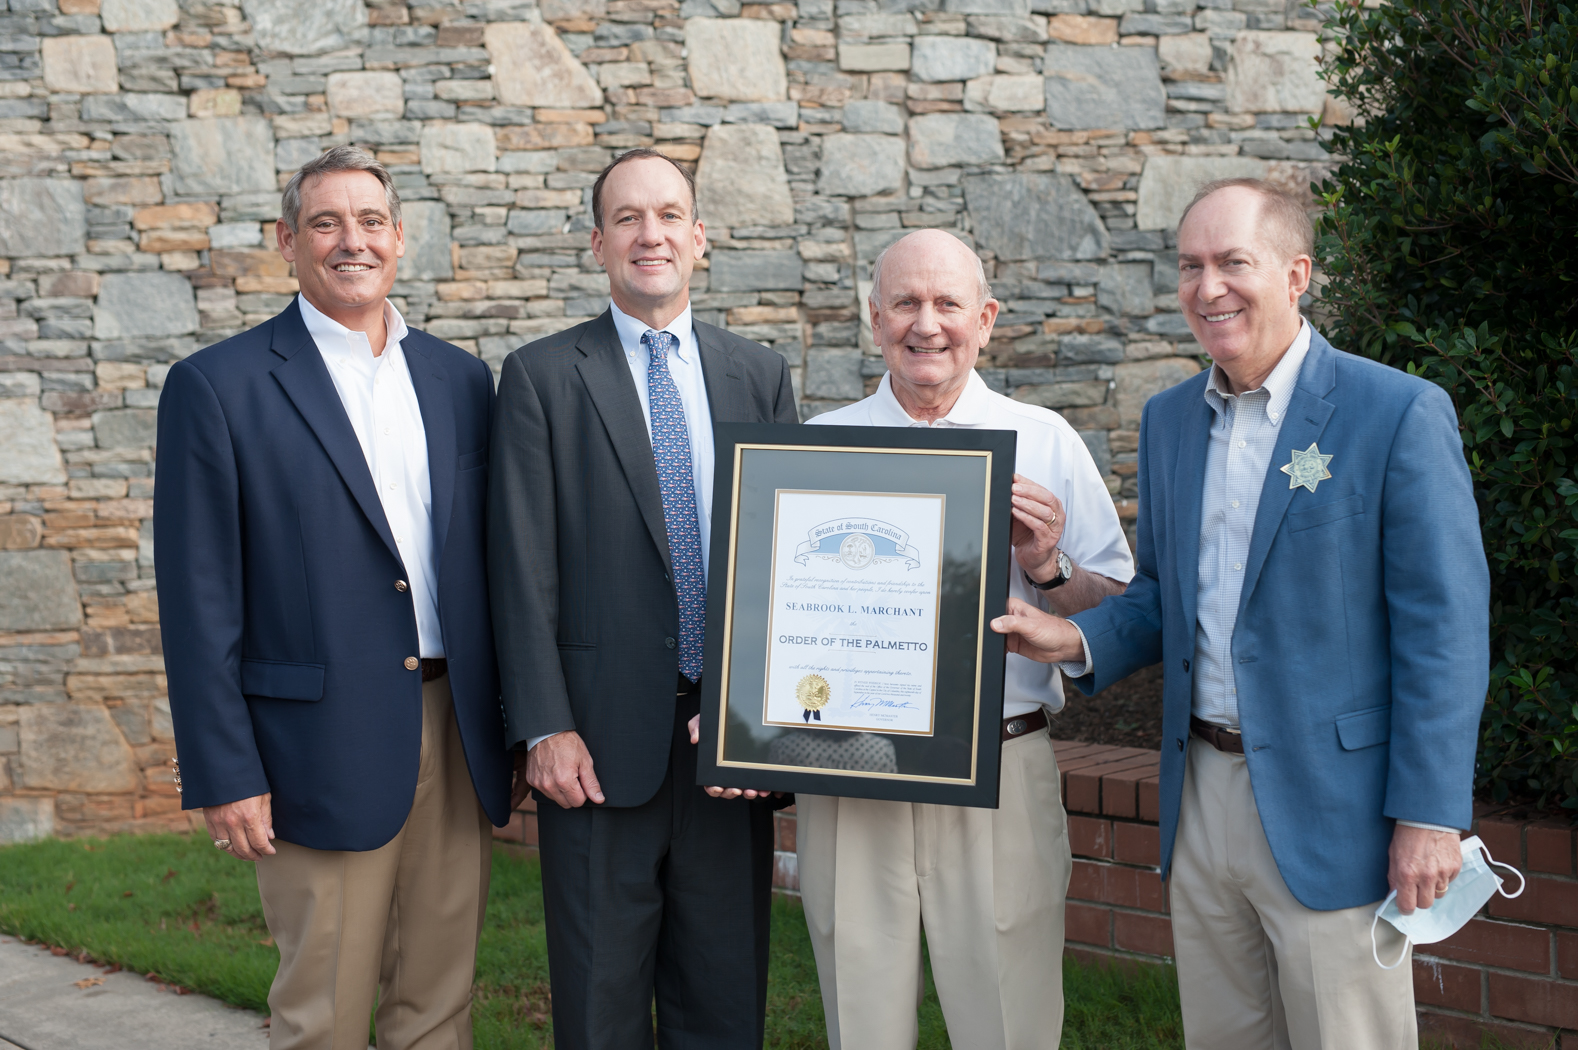  S.C. Sen. Ross Turner presented Seabrook Marchant, president and broker-in-charge of Marchant Real Estate and founder of LEAD, with the Order of the Palmetto Sept 18. (Photo/Provided)